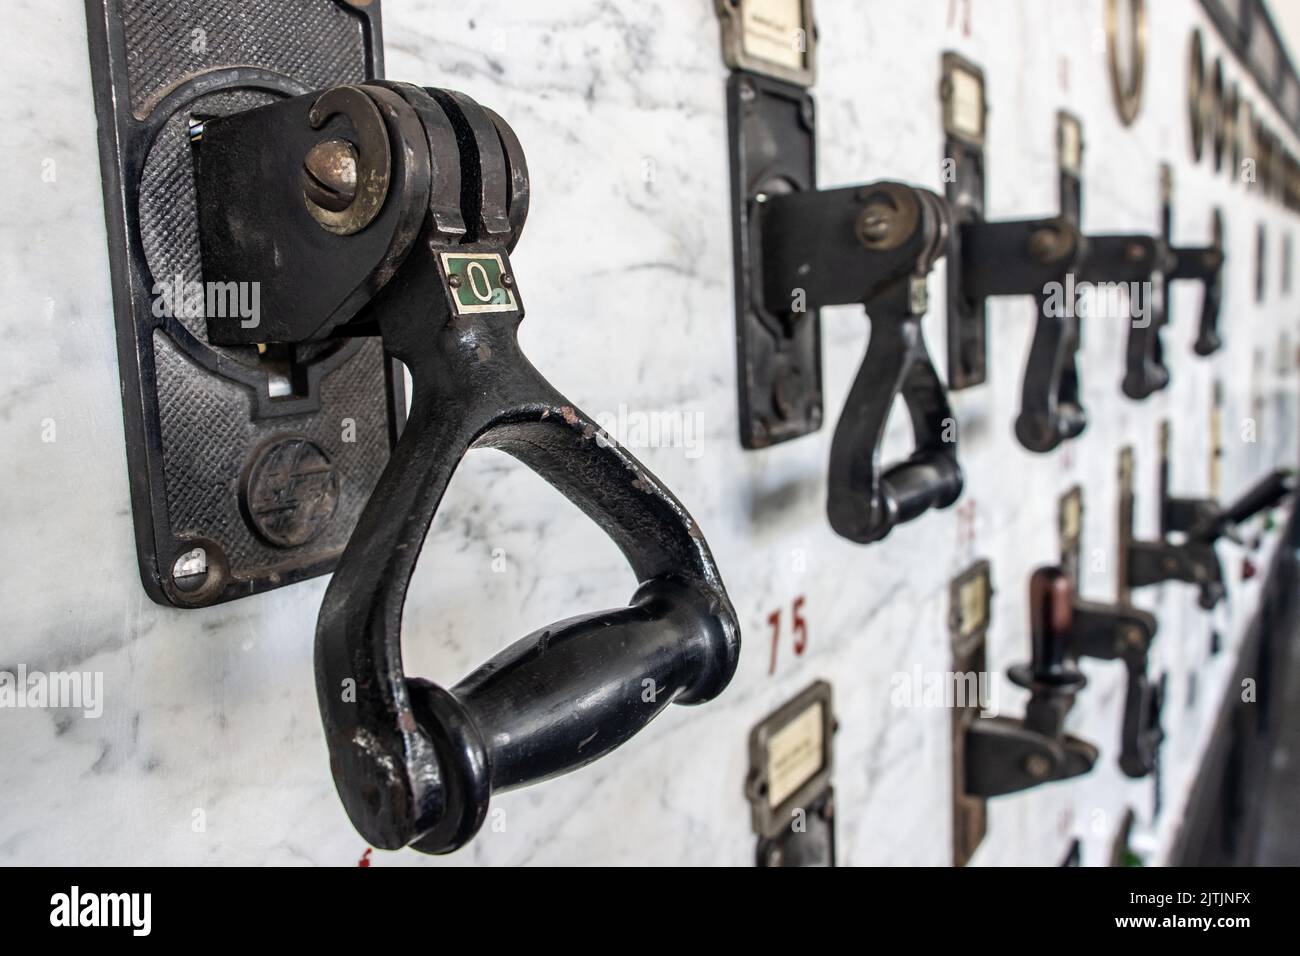 Retro electrical circuit breakers on the control panel Stock Photo